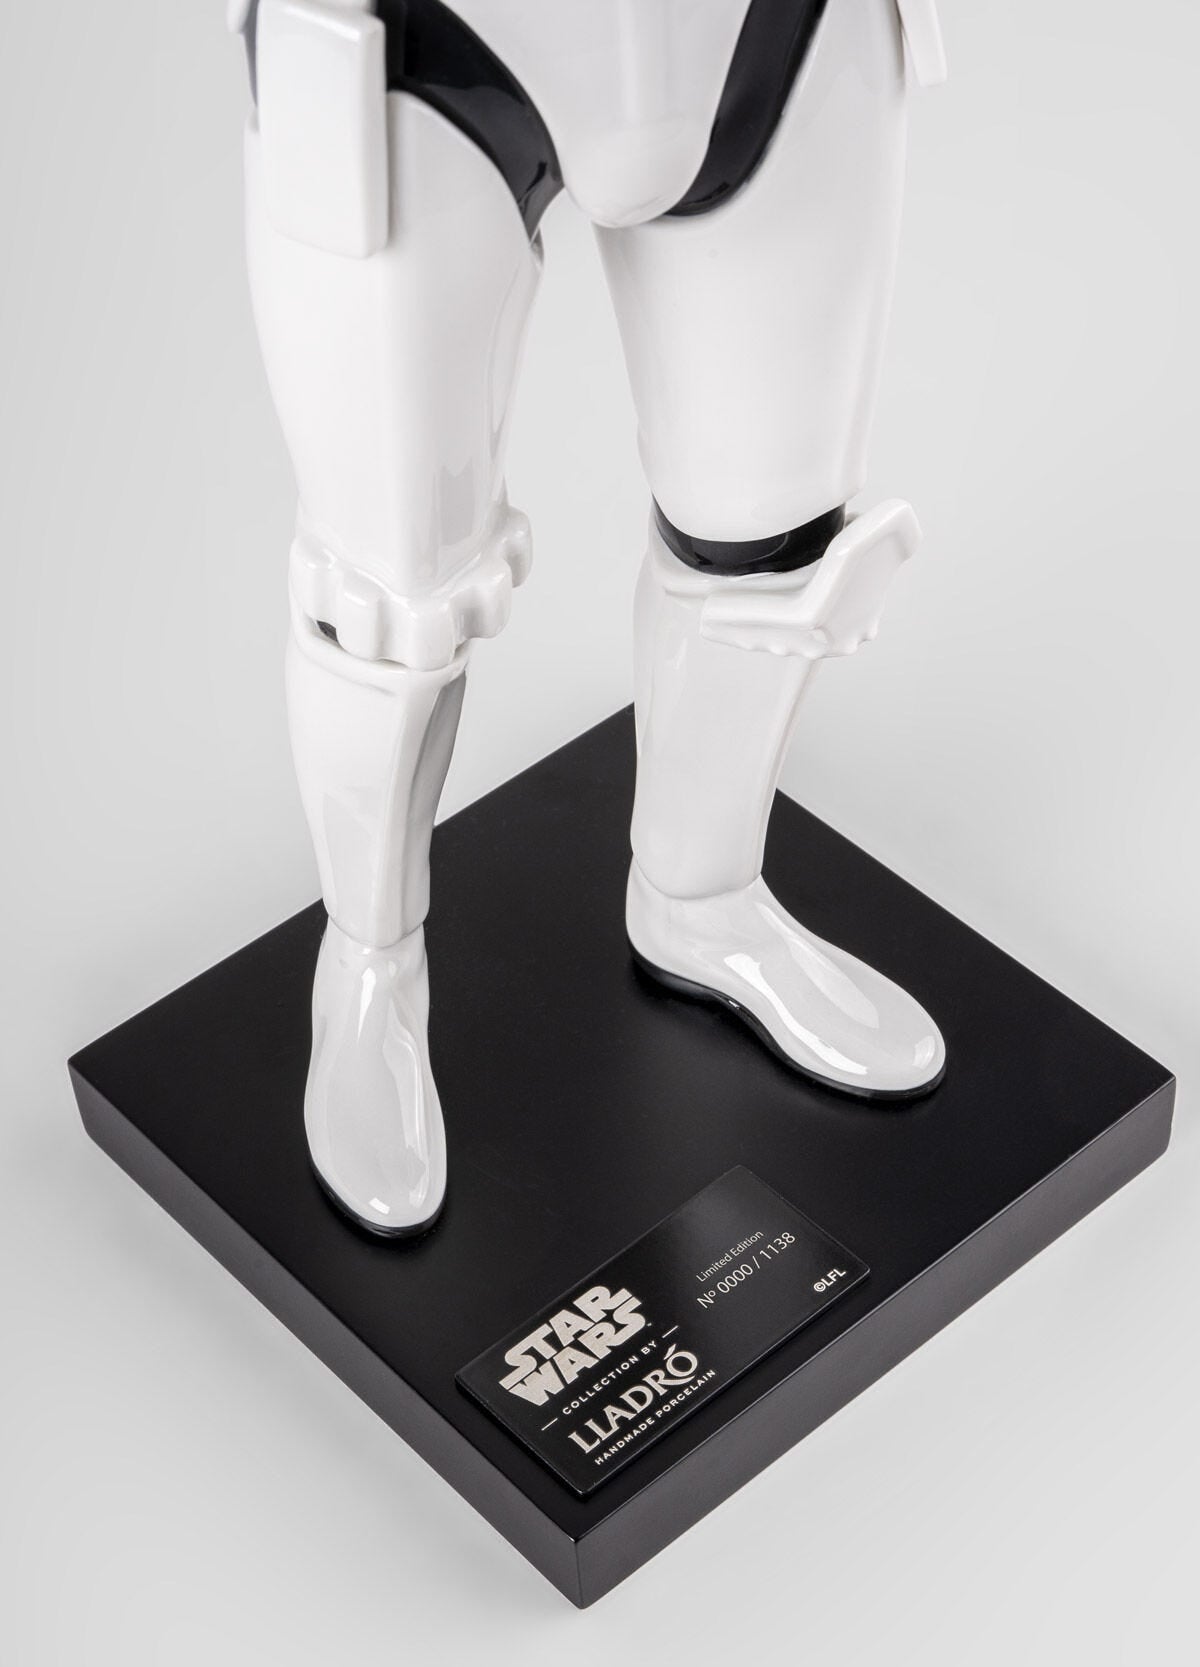 Stormtrooper™ Sculpture Limited Edition